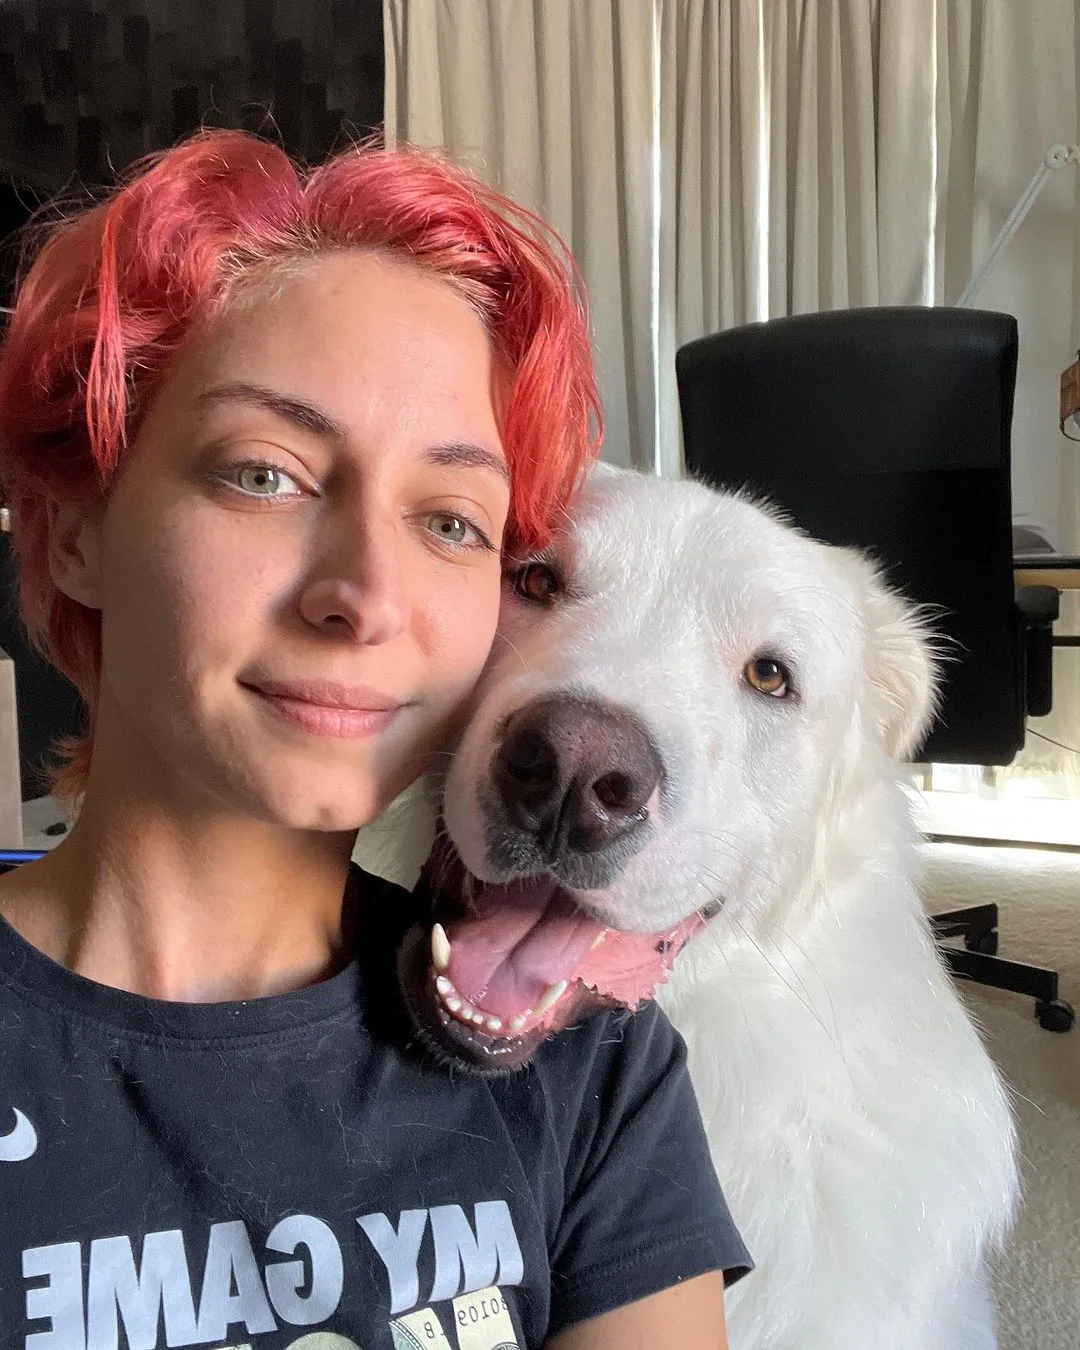 red headed owner and white dog